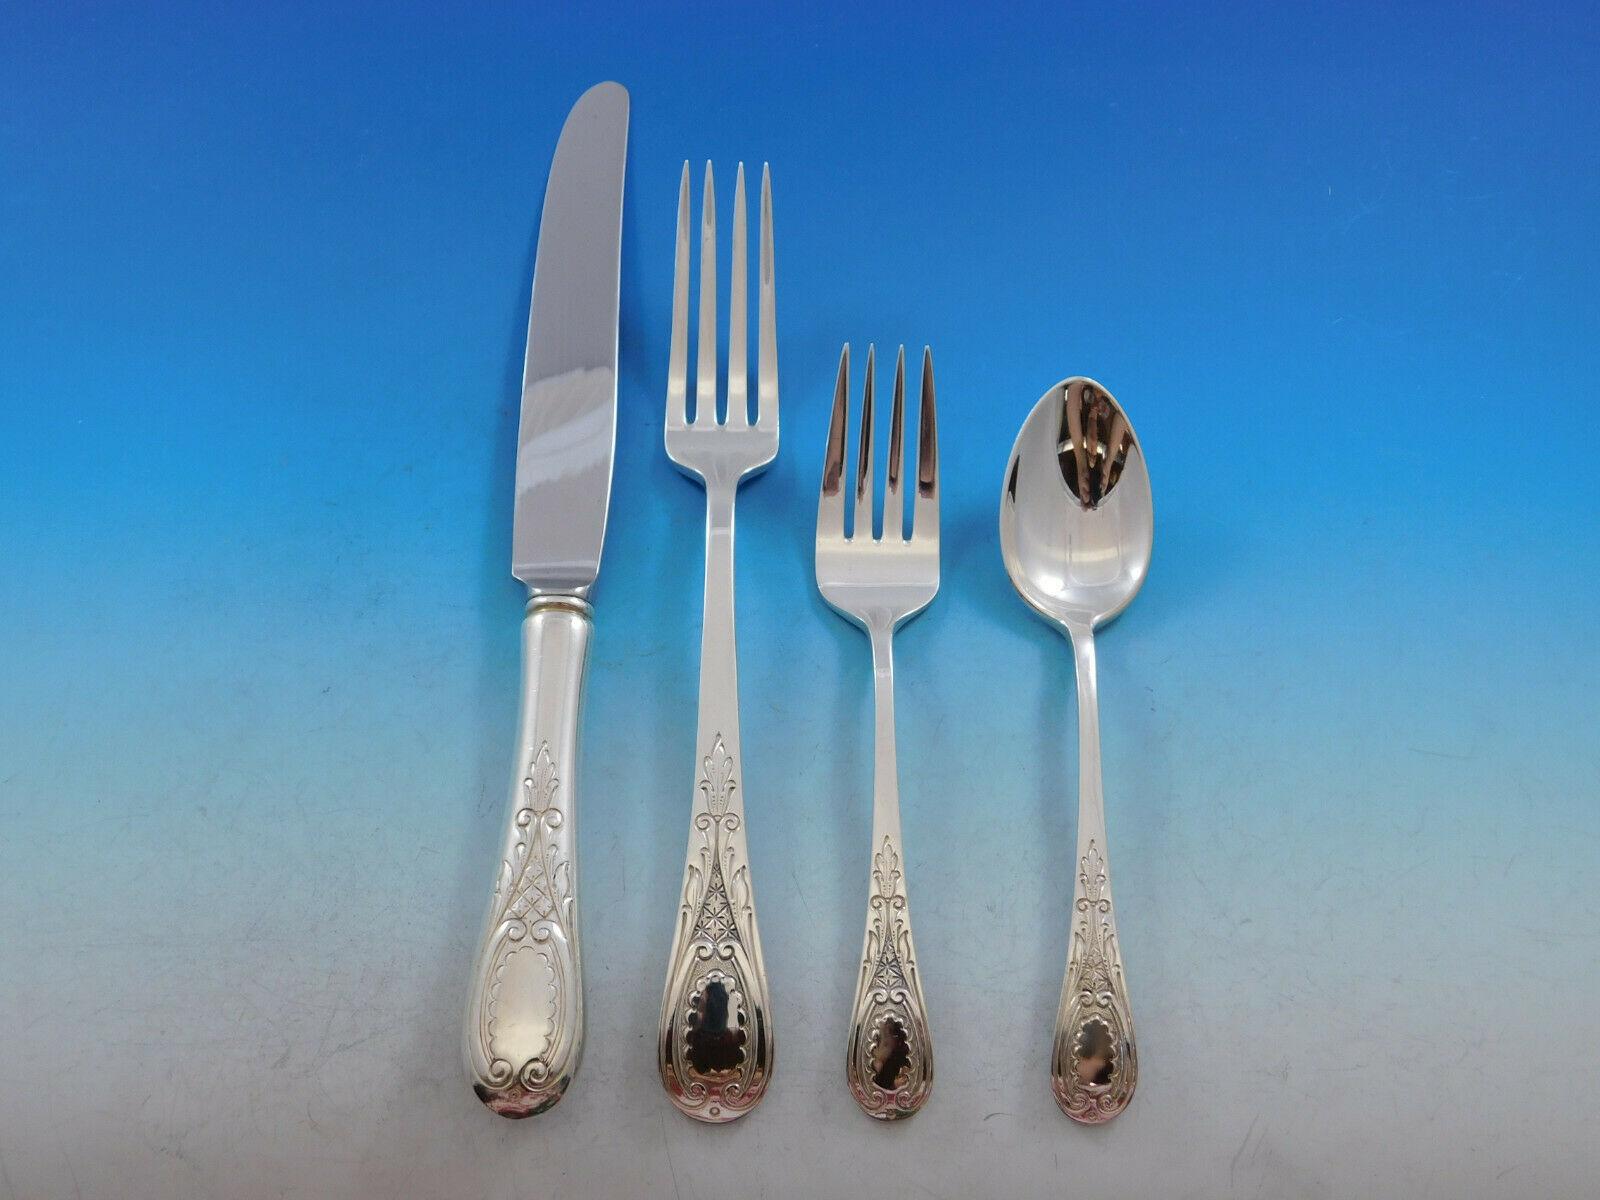 Windsor castle by Tuttle sterling silver flatware set, 70 pieces. Pieces are stamped with date mark from Eisenhower and Truman, for the years 1945-1961. This set includes:

8 dinner size knives, 9 3/8